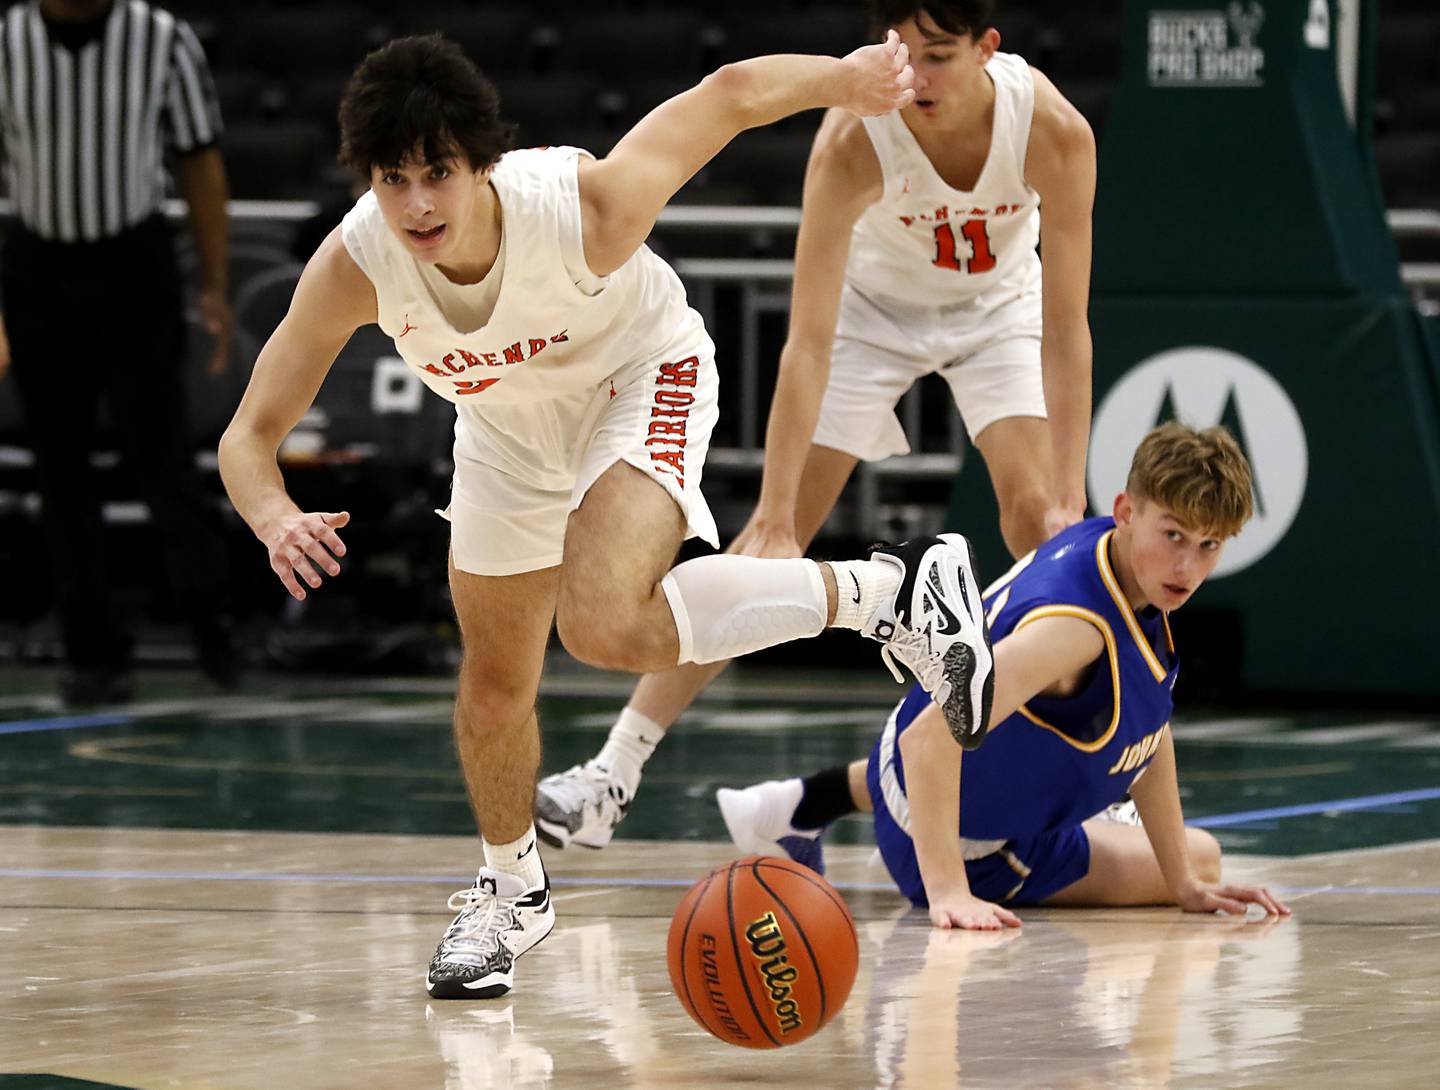 McHenry's Marko Visnjevac chases down a loose ball during a non-conference basketball game Sunday, Nov. 27, 2022, between Johnsburg and McHenry at Fiserv Forum in Milwaukee.